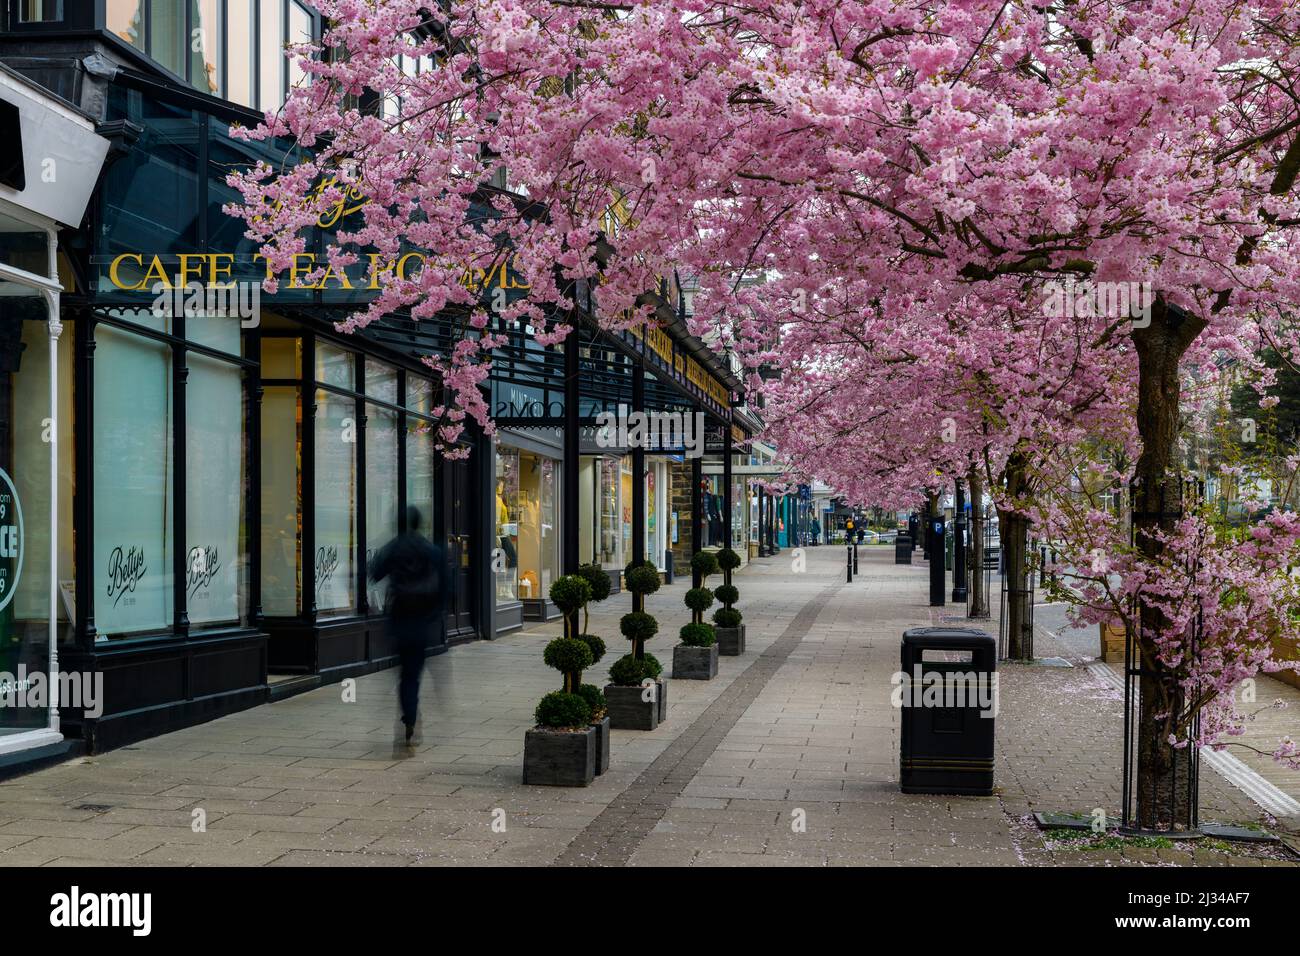 Scenic spring town centre (beautiful colourful cherry trees in bloom, stylish restaurant-cafe shop front) - The Grove, Ilkley, Yorkshire, England, UK. Stock Photo